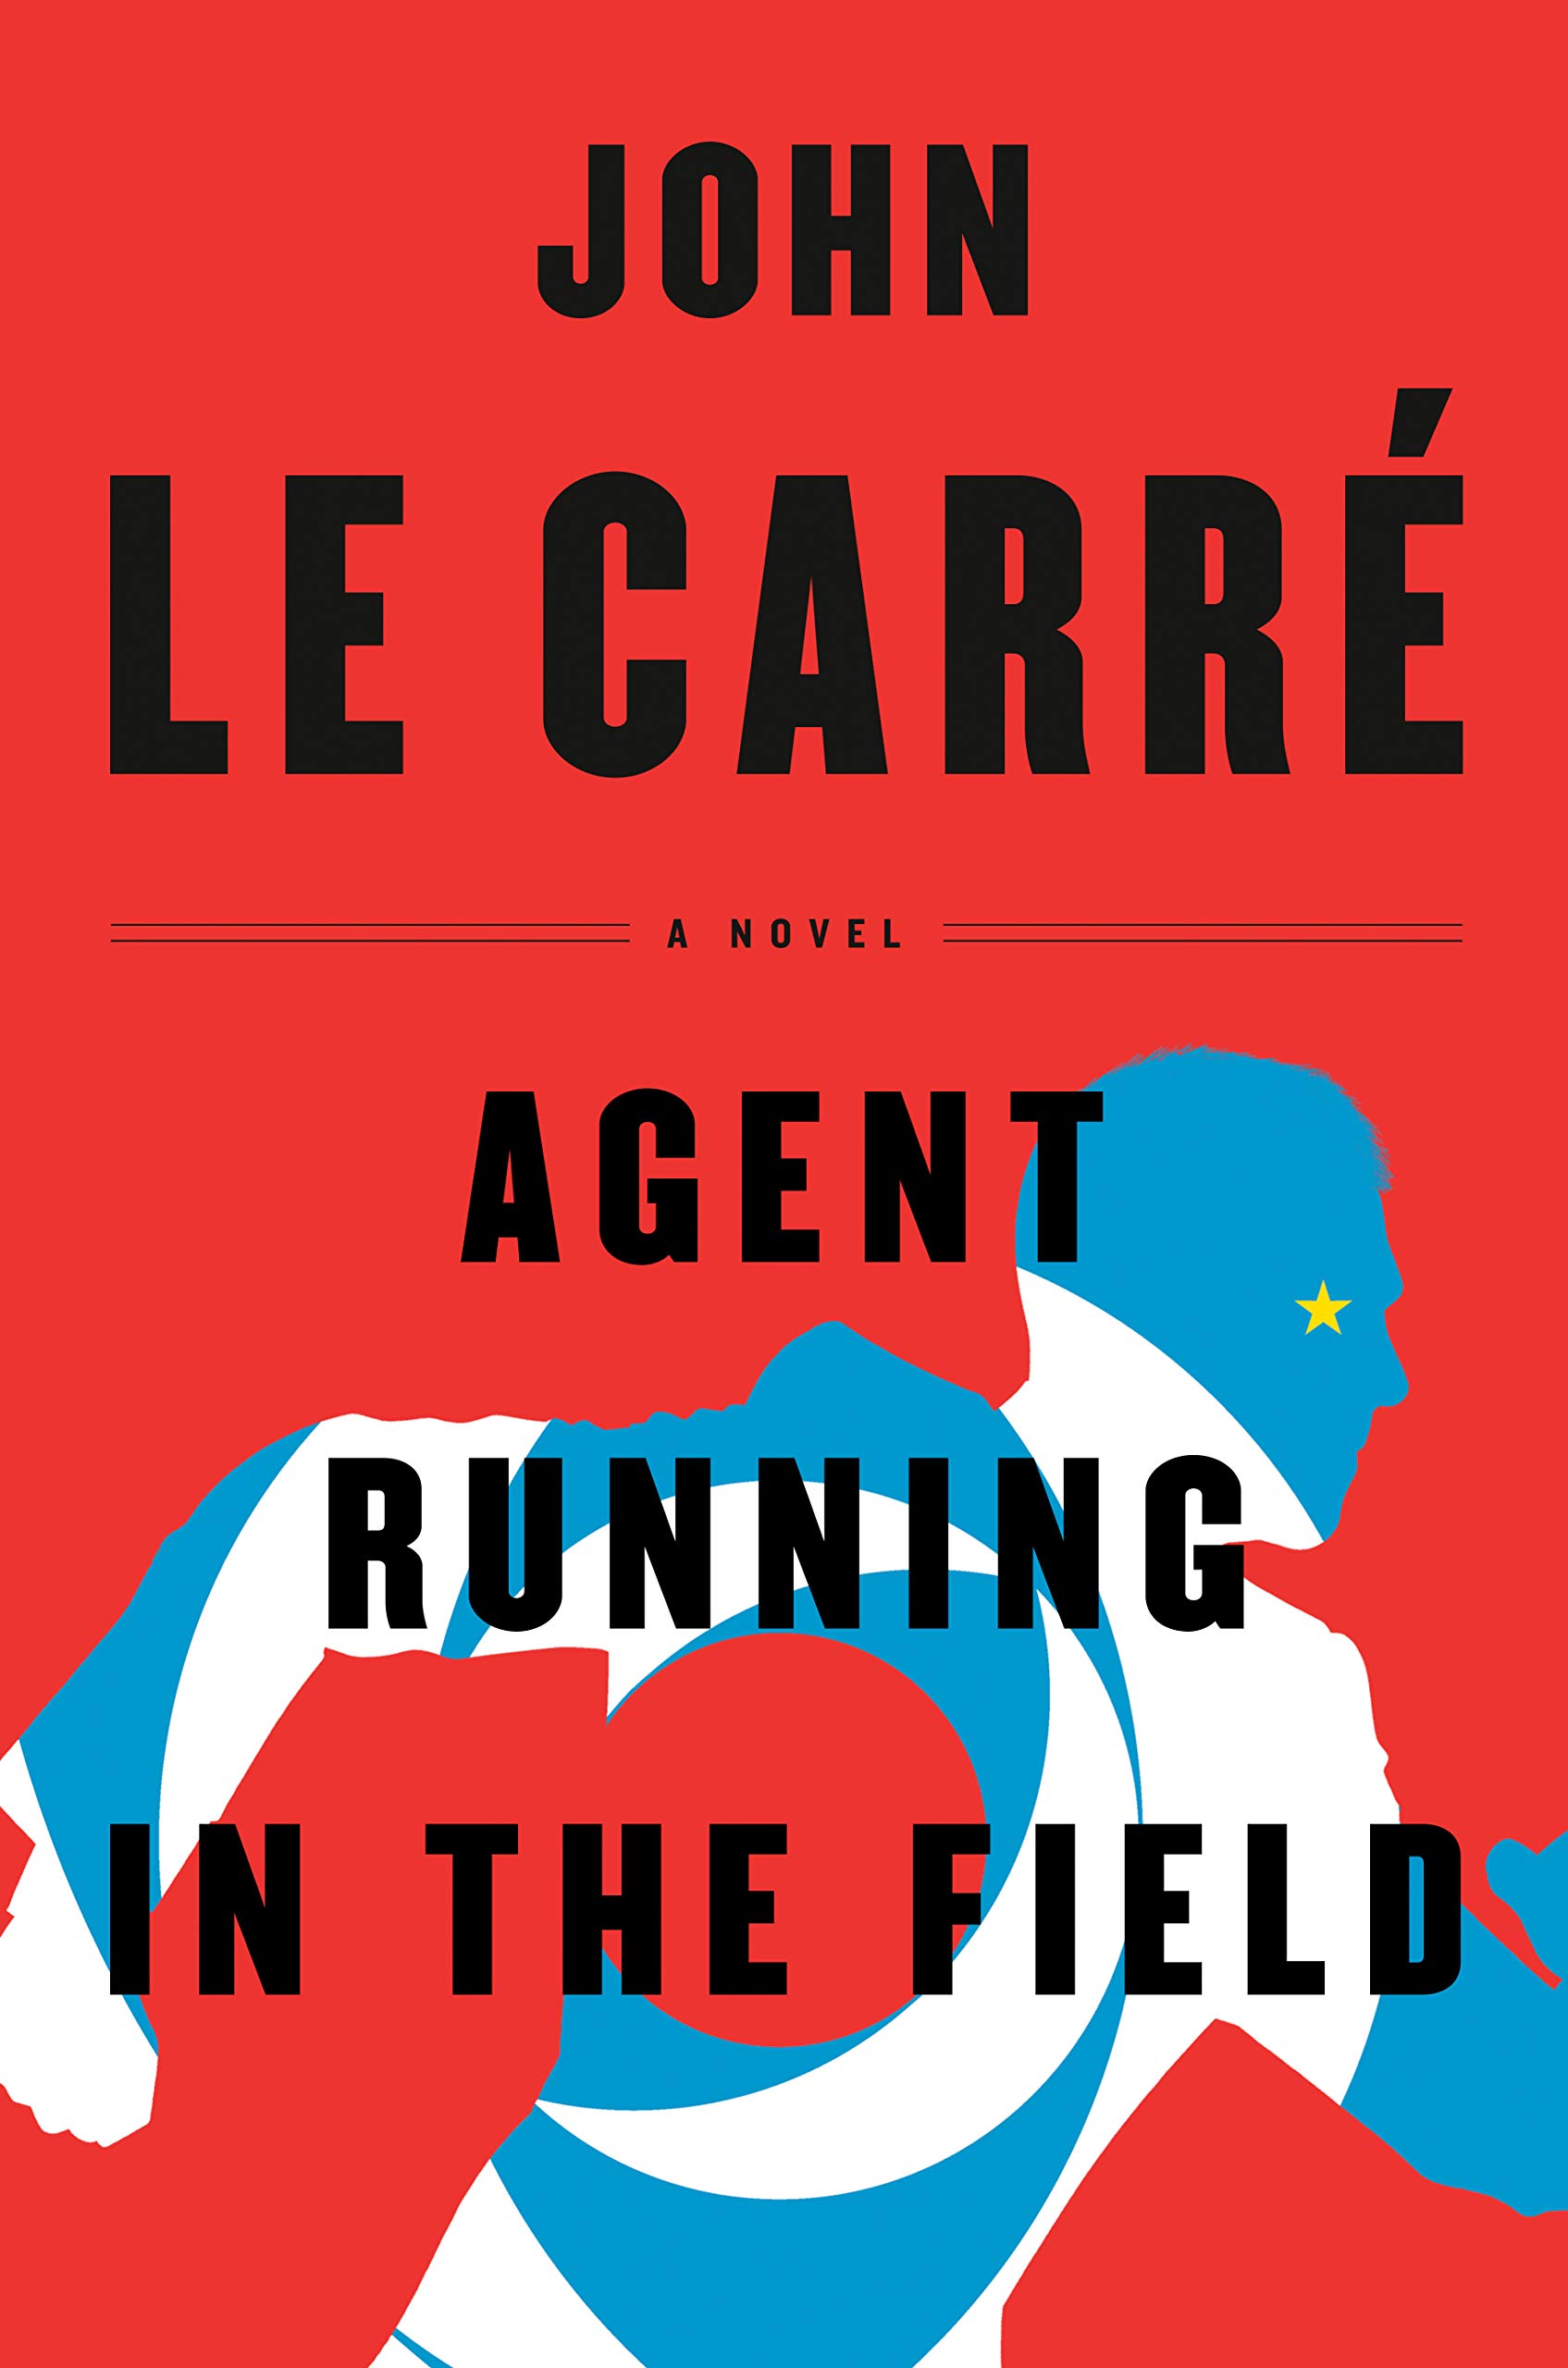 Agent Running In The Field by John Le Carre.